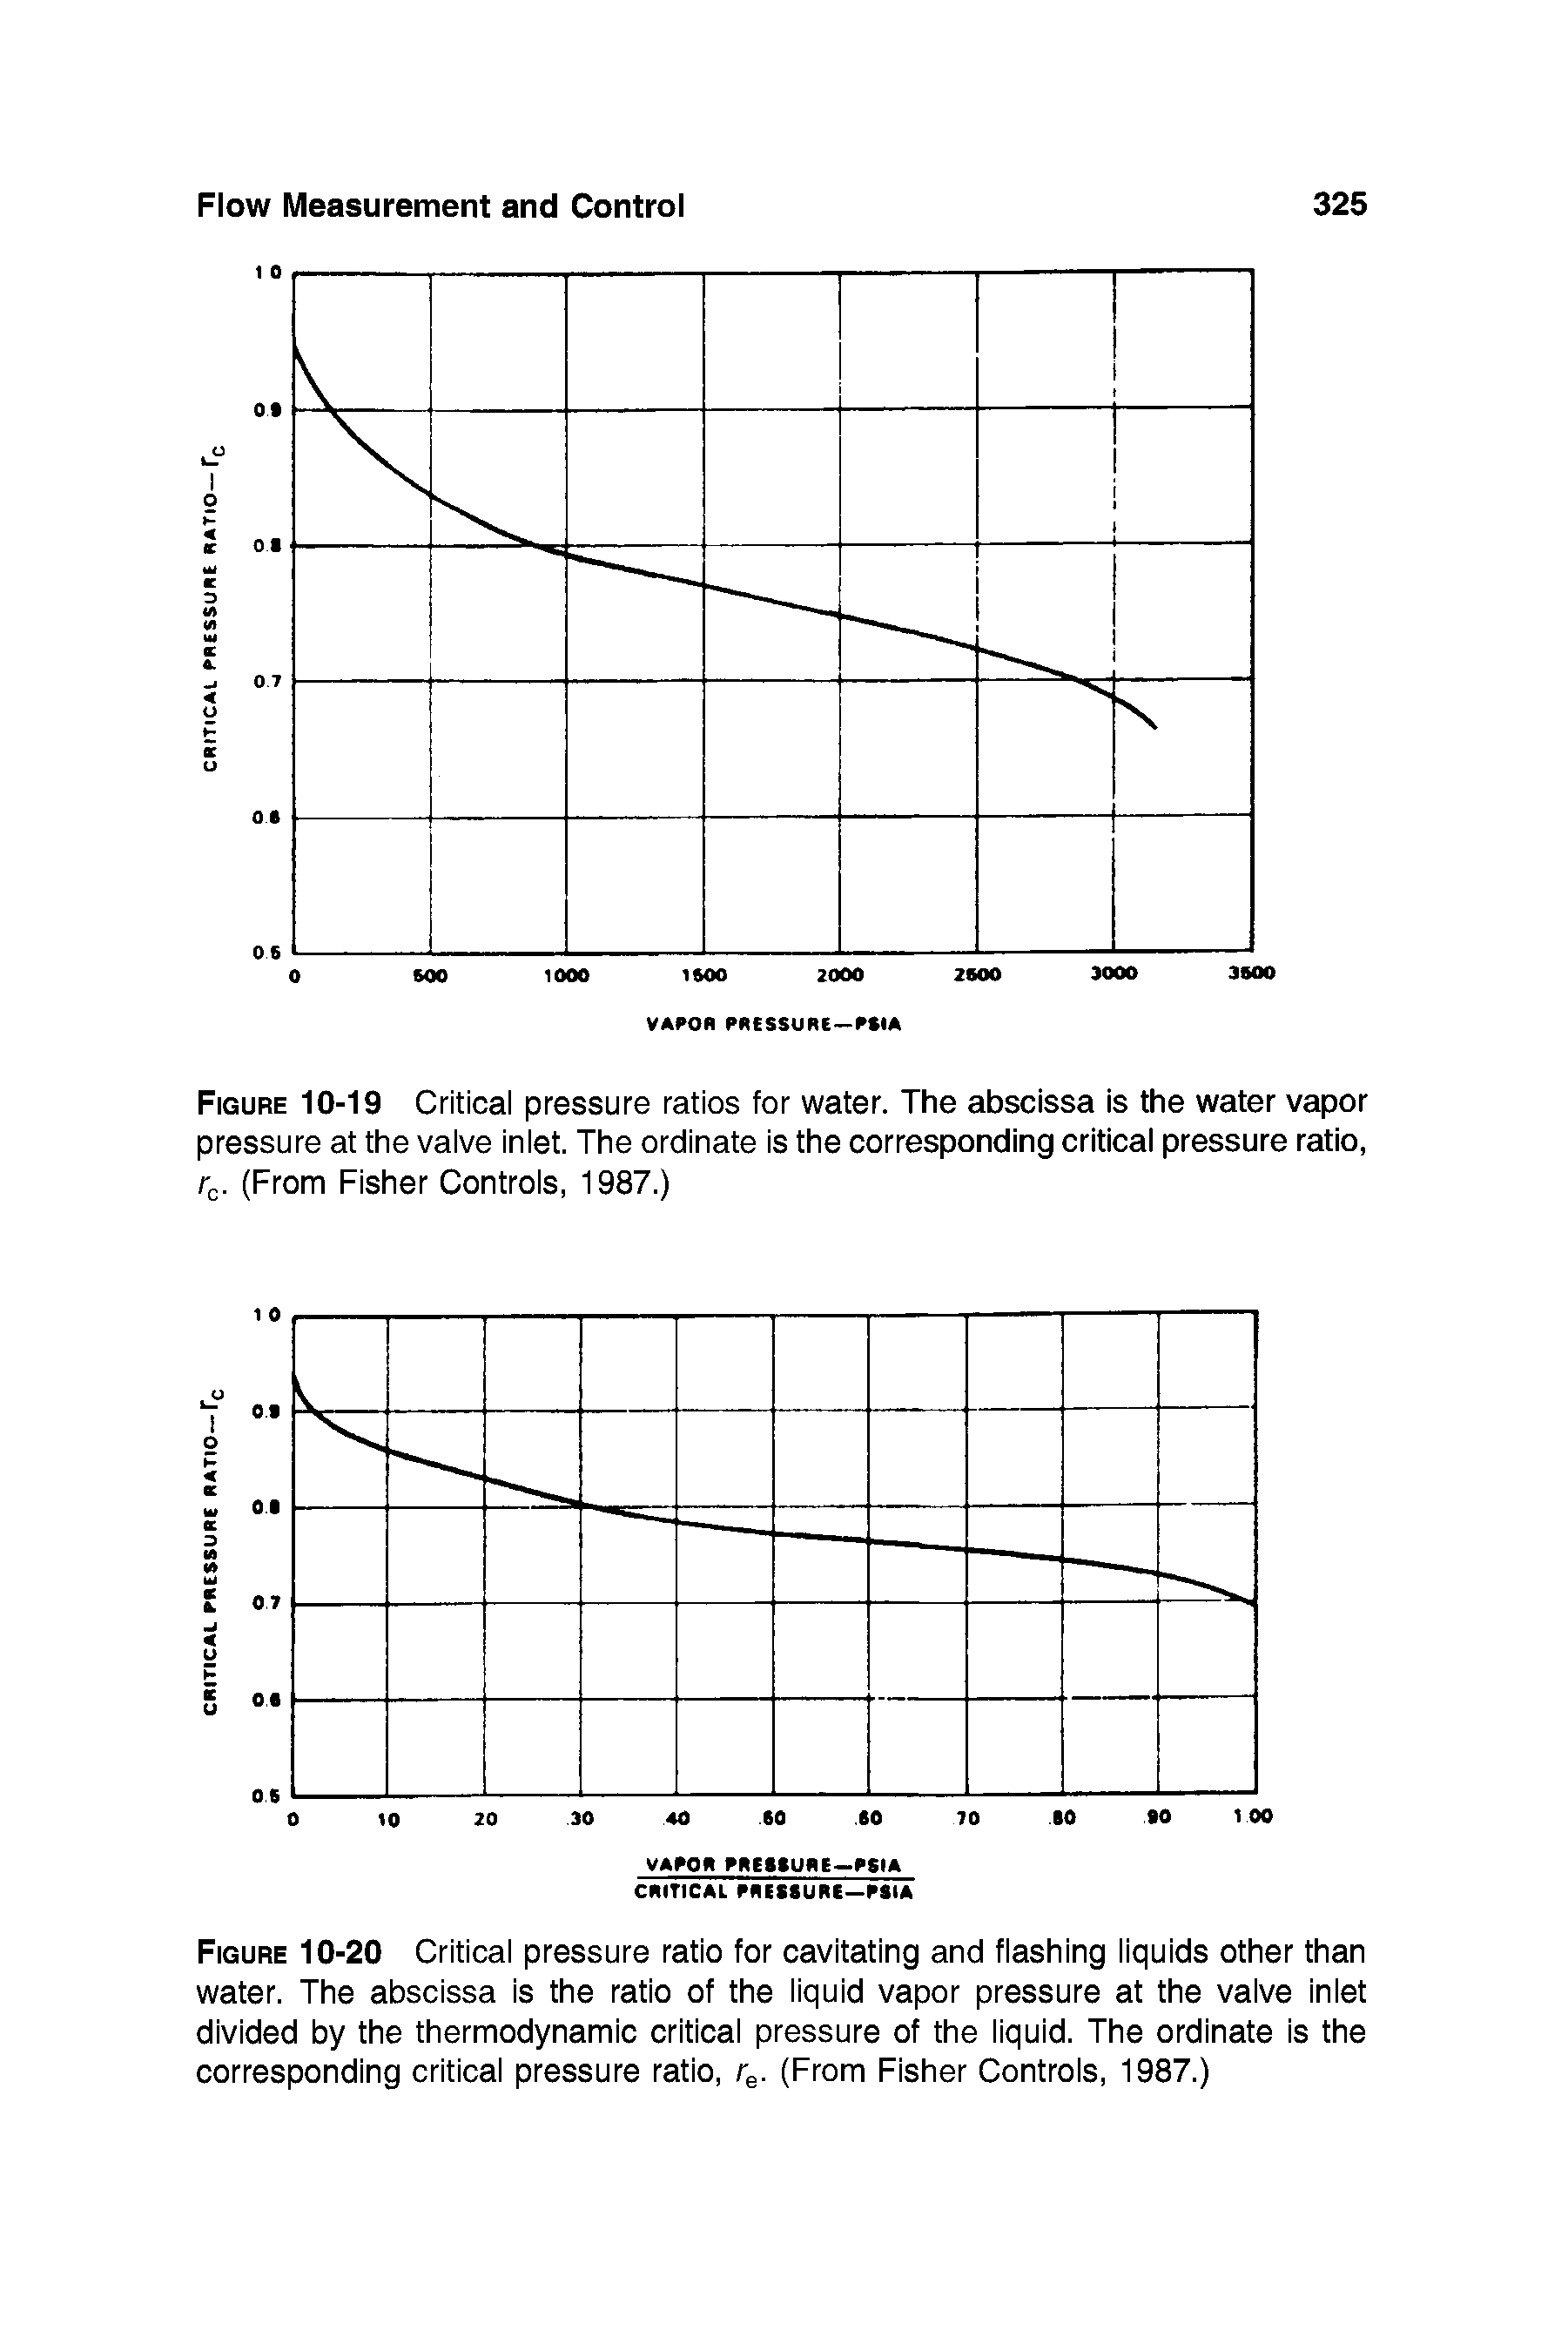 Figure 10-19 Critical pressure ratios for water. The abscissa is the water vapor pressure at the valve inlet. The ordinate is the corresponding critical pressure ratio, rc. (From Fisher Controls, 1987.)...